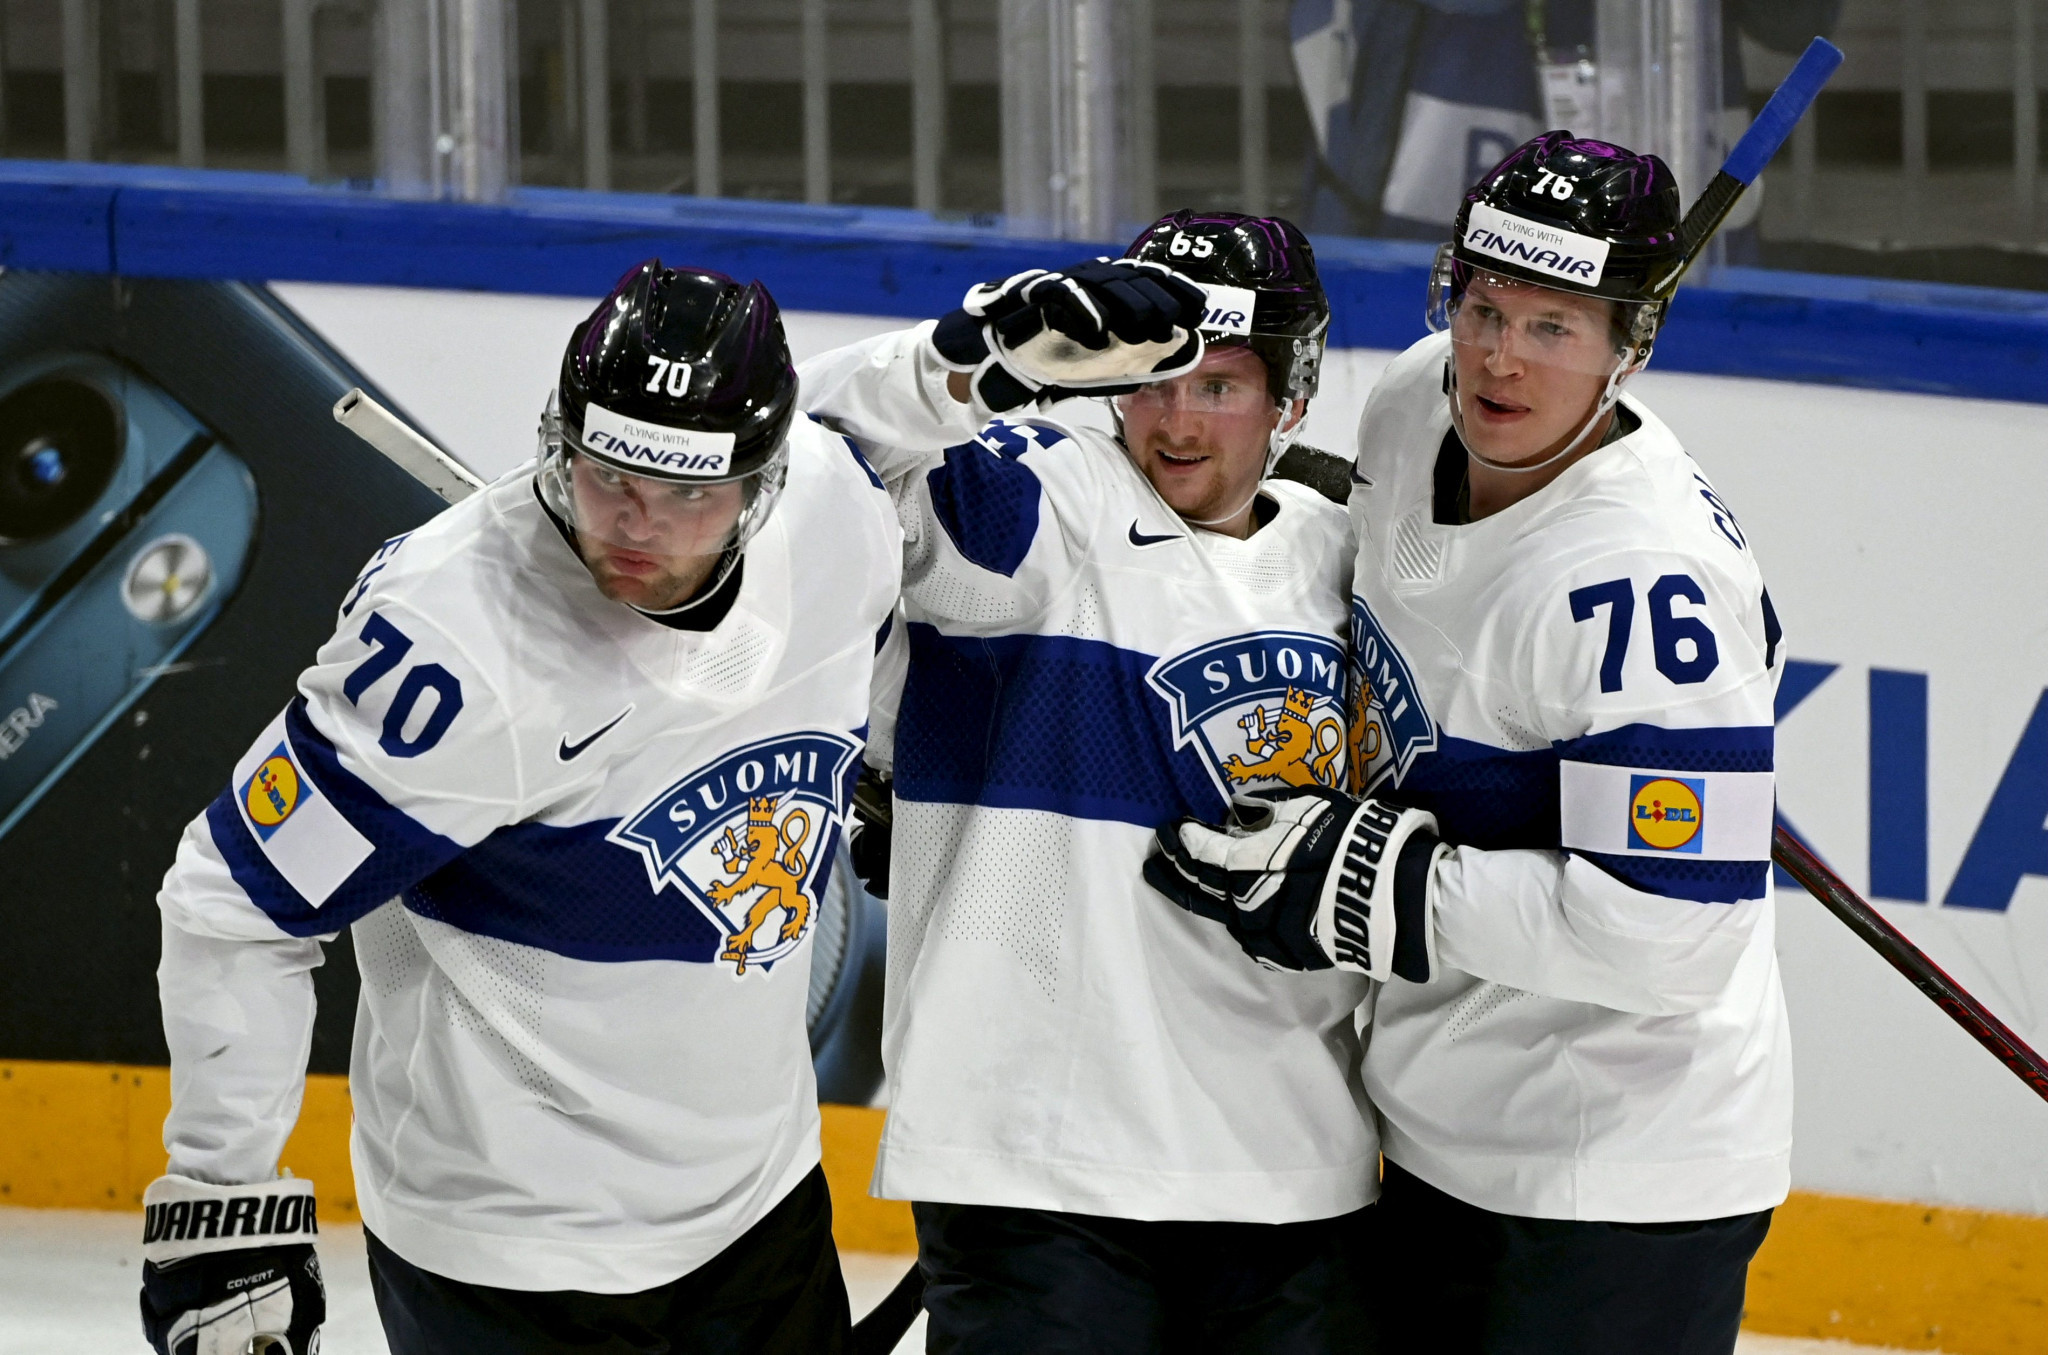 Finland secured a late win over Latvia in Group B ©Getty Images